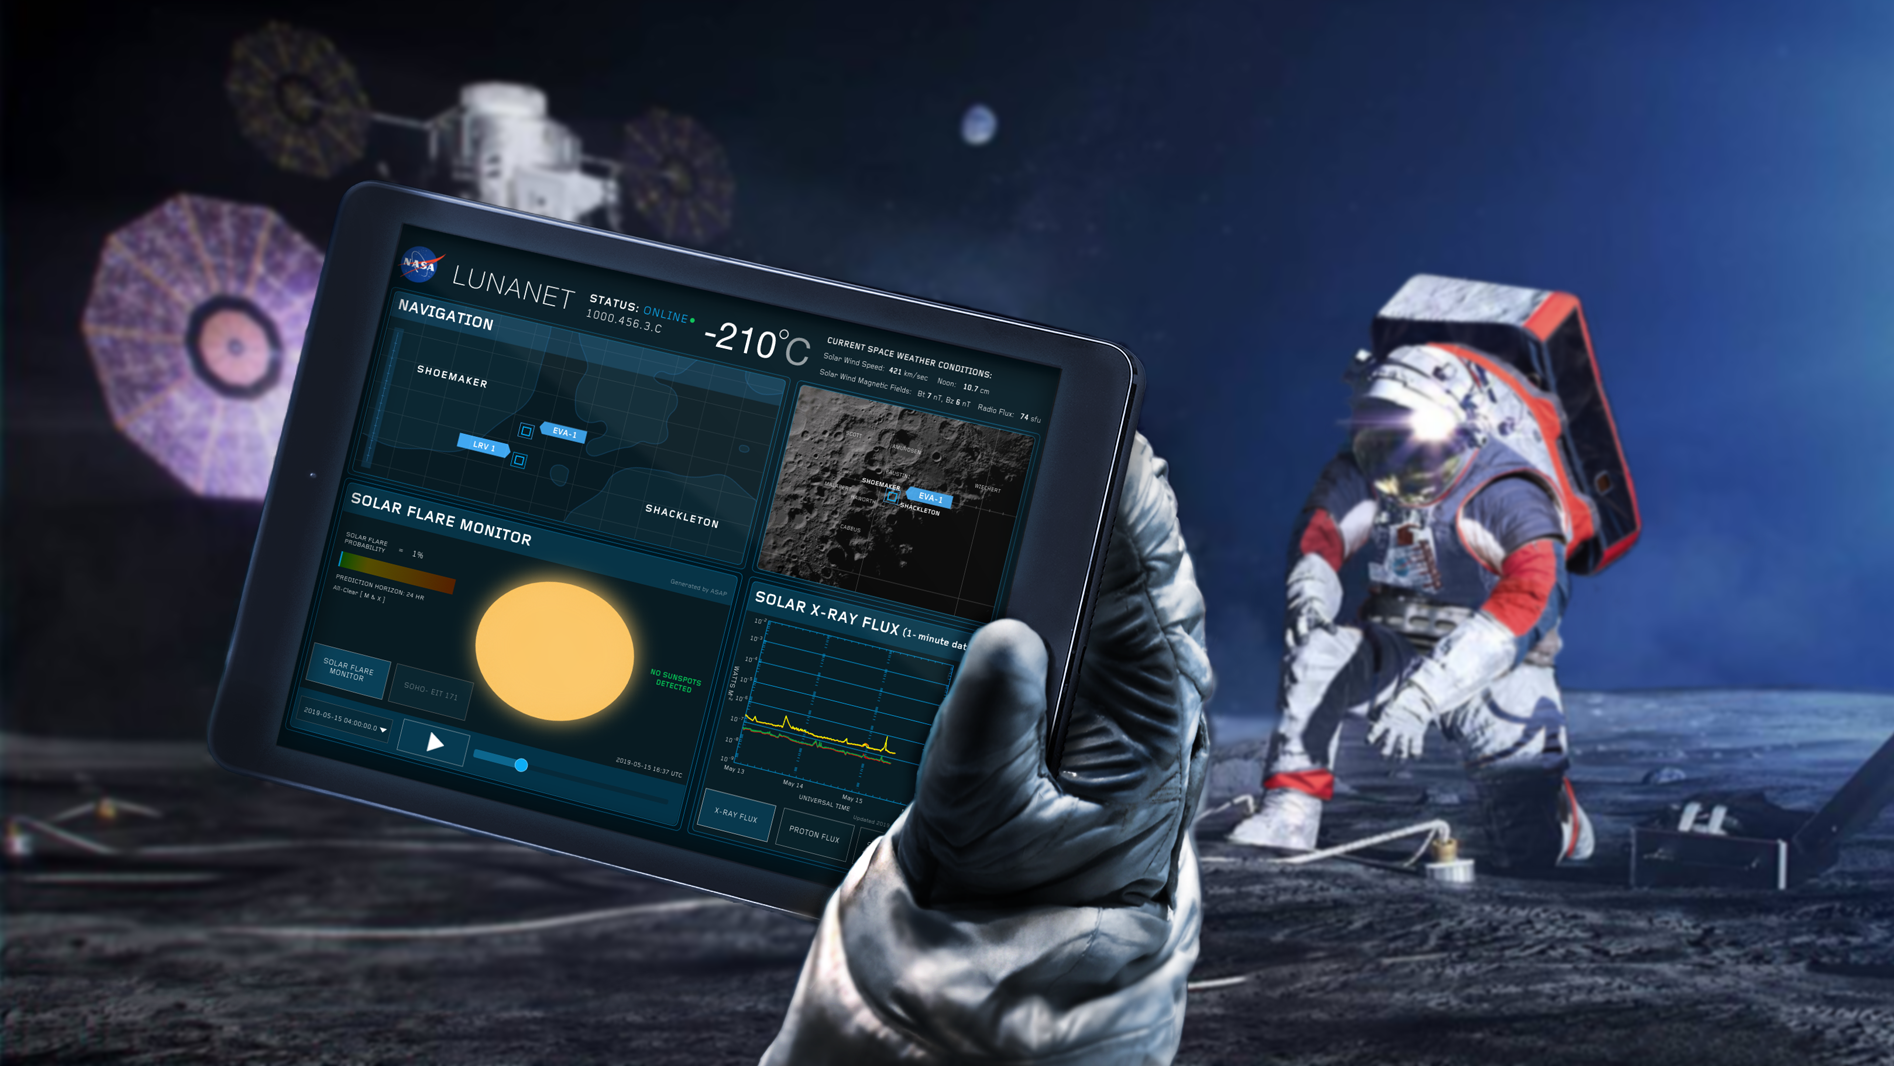 Graphic featuring LunaNet device and astronaut on the moon.